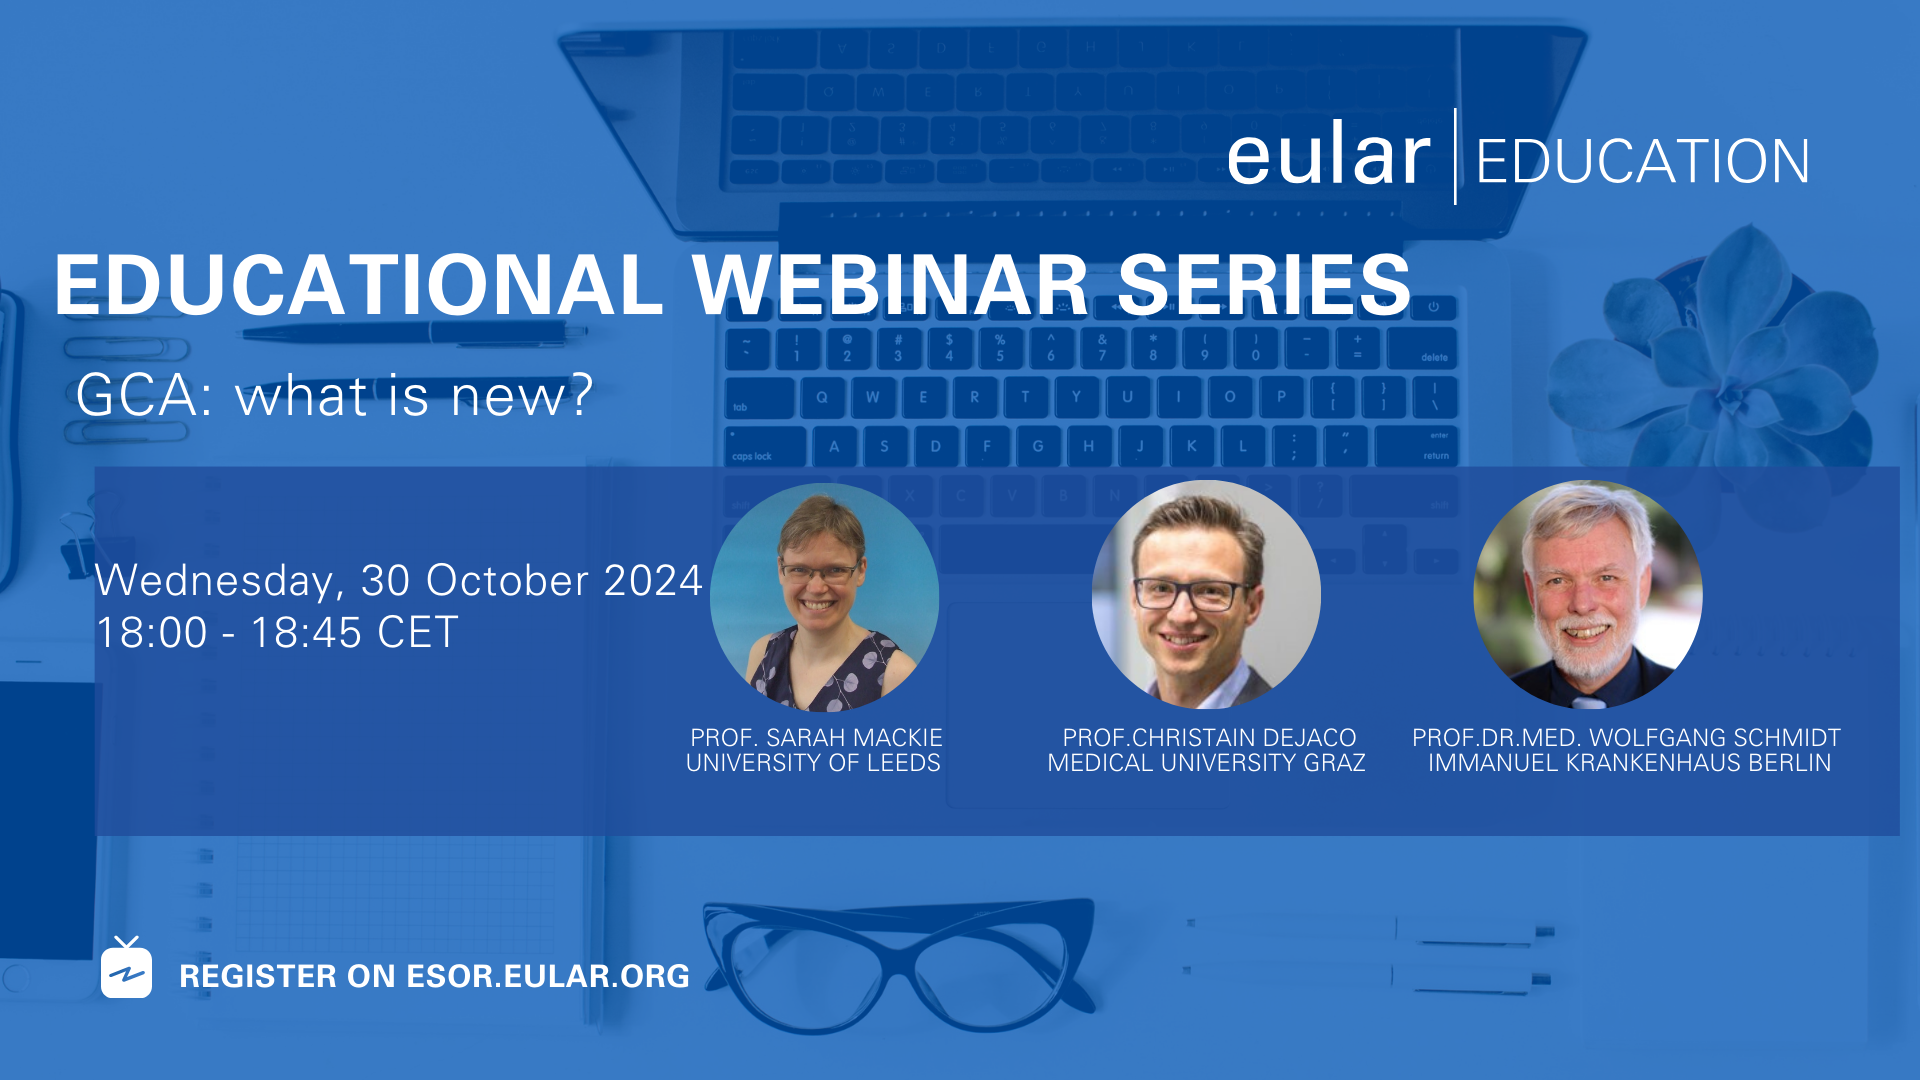 Eduucational%20webinar%20series%20with%20speakers%20and%20topic%20related%20background%20%20%284%29.png